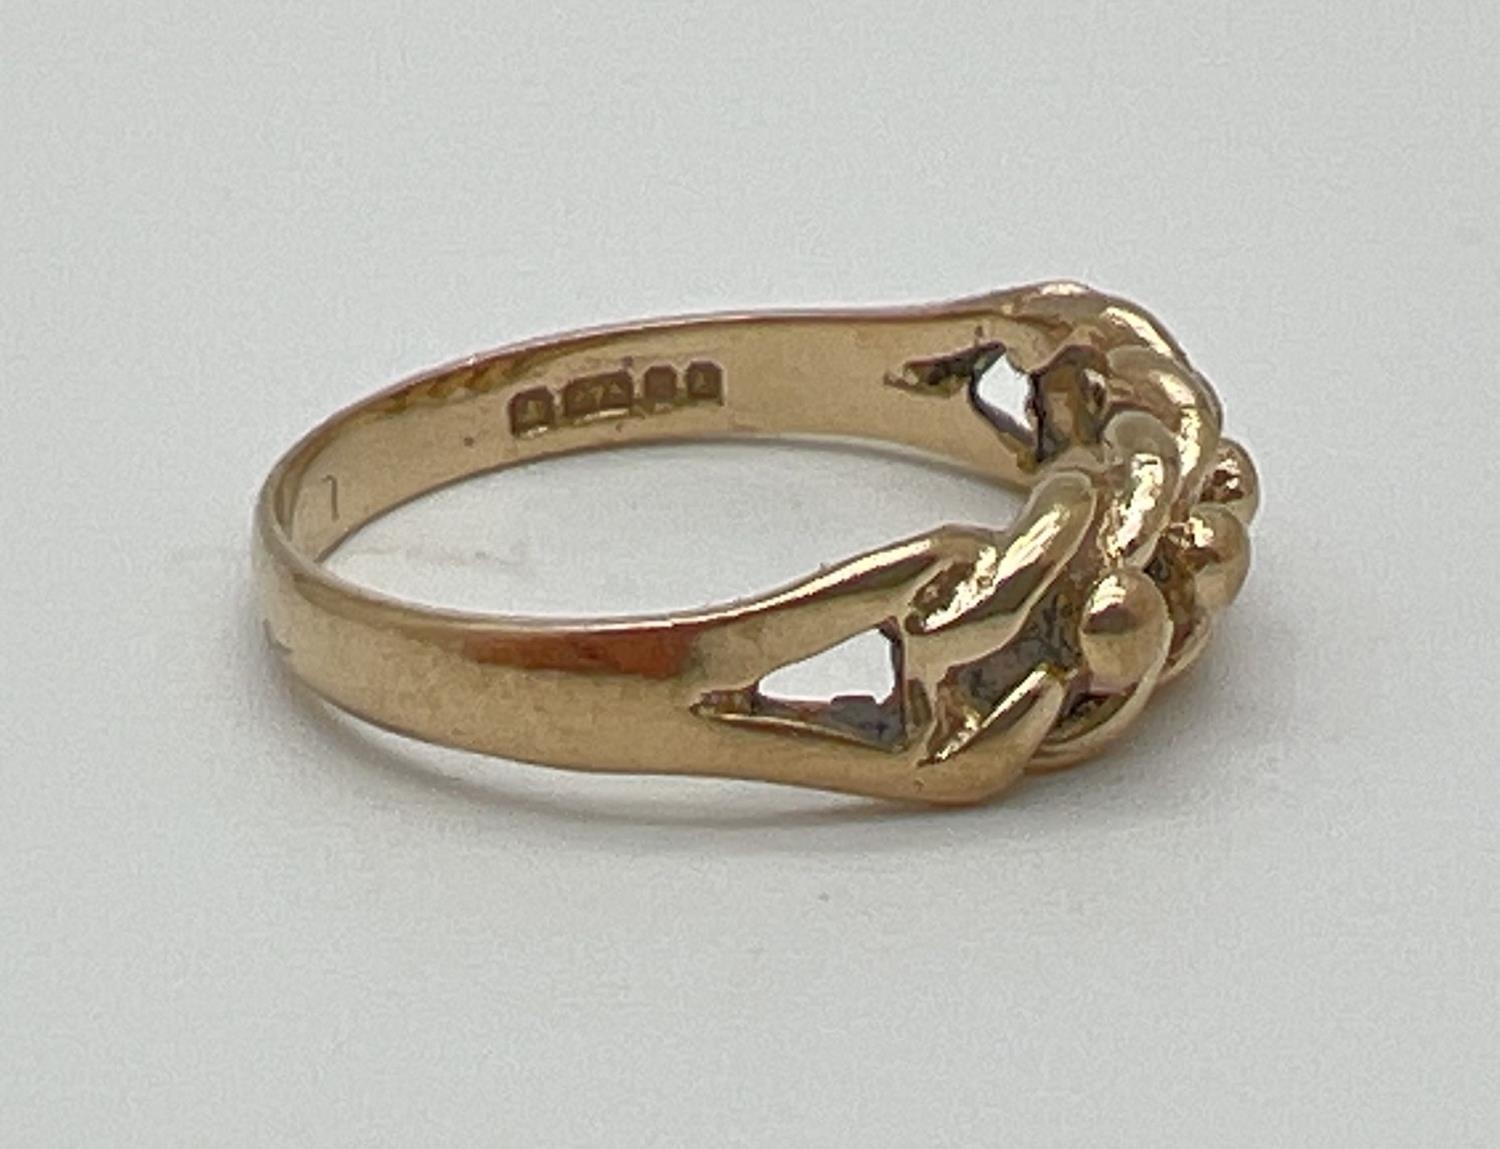 A vintage 9ct gold single row Keeper ring, fully hallmarked inside band. Ring size N. Total weight - Image 2 of 3